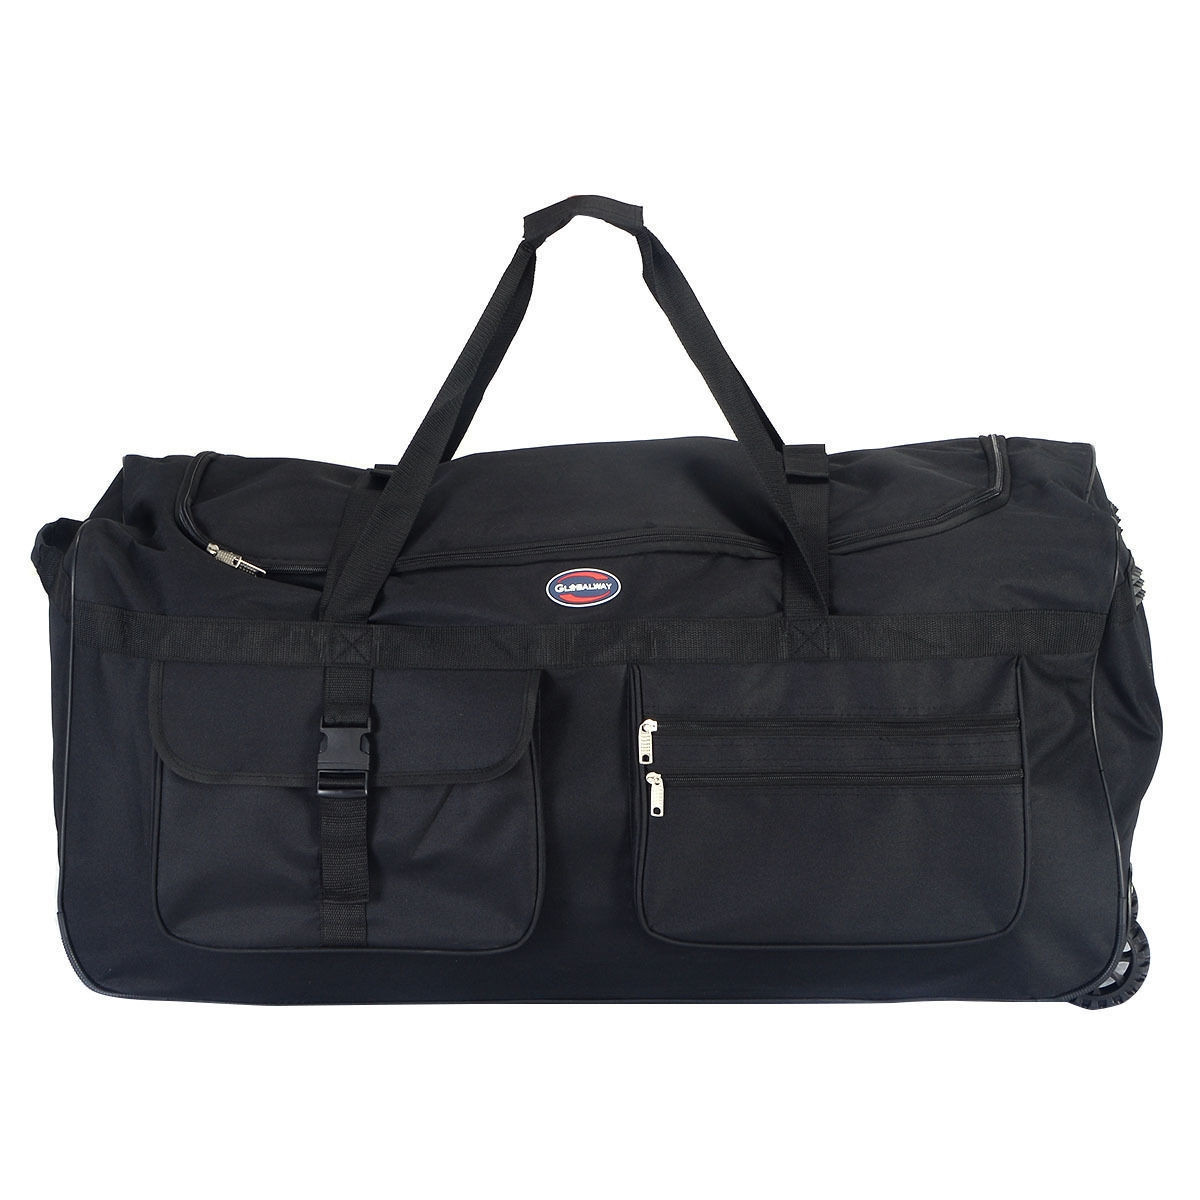 36 In. Rolling Wheeled Tote Duffle Bag Travel Suitcase